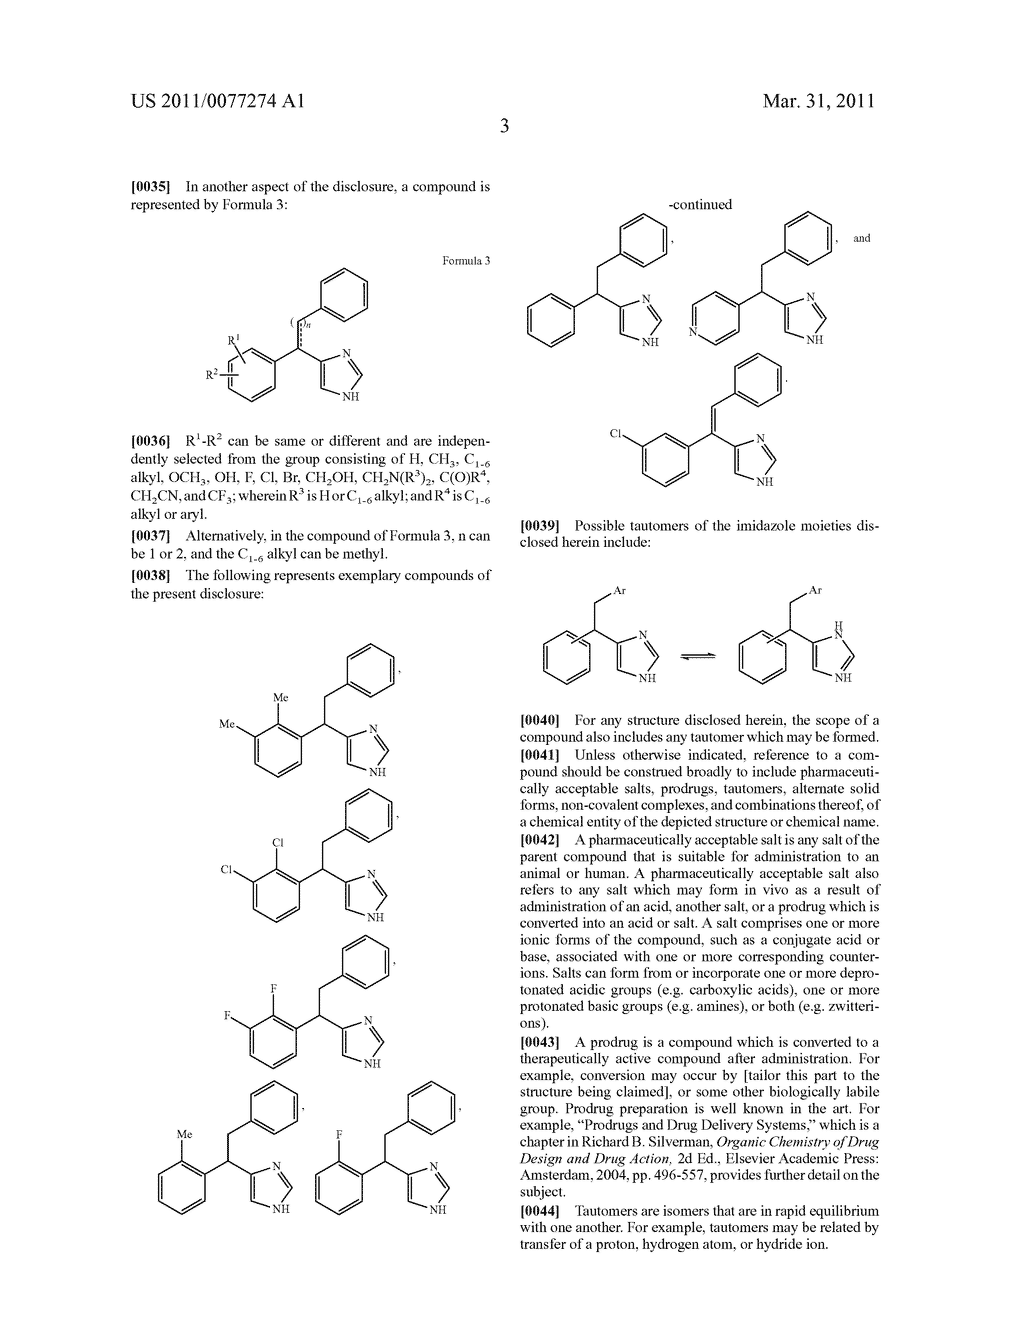 SUBSTITUTED-ARYL-2-PHENYLETHYL-1H-IMIDAZOLE COMPOUNDS AS SUBTYPE SELECTIVE MODULATORS OF ALPHA 2B AND/OR ALPHA 2C ADRENERGIC RECEPTORS - diagram, schematic, and image 04